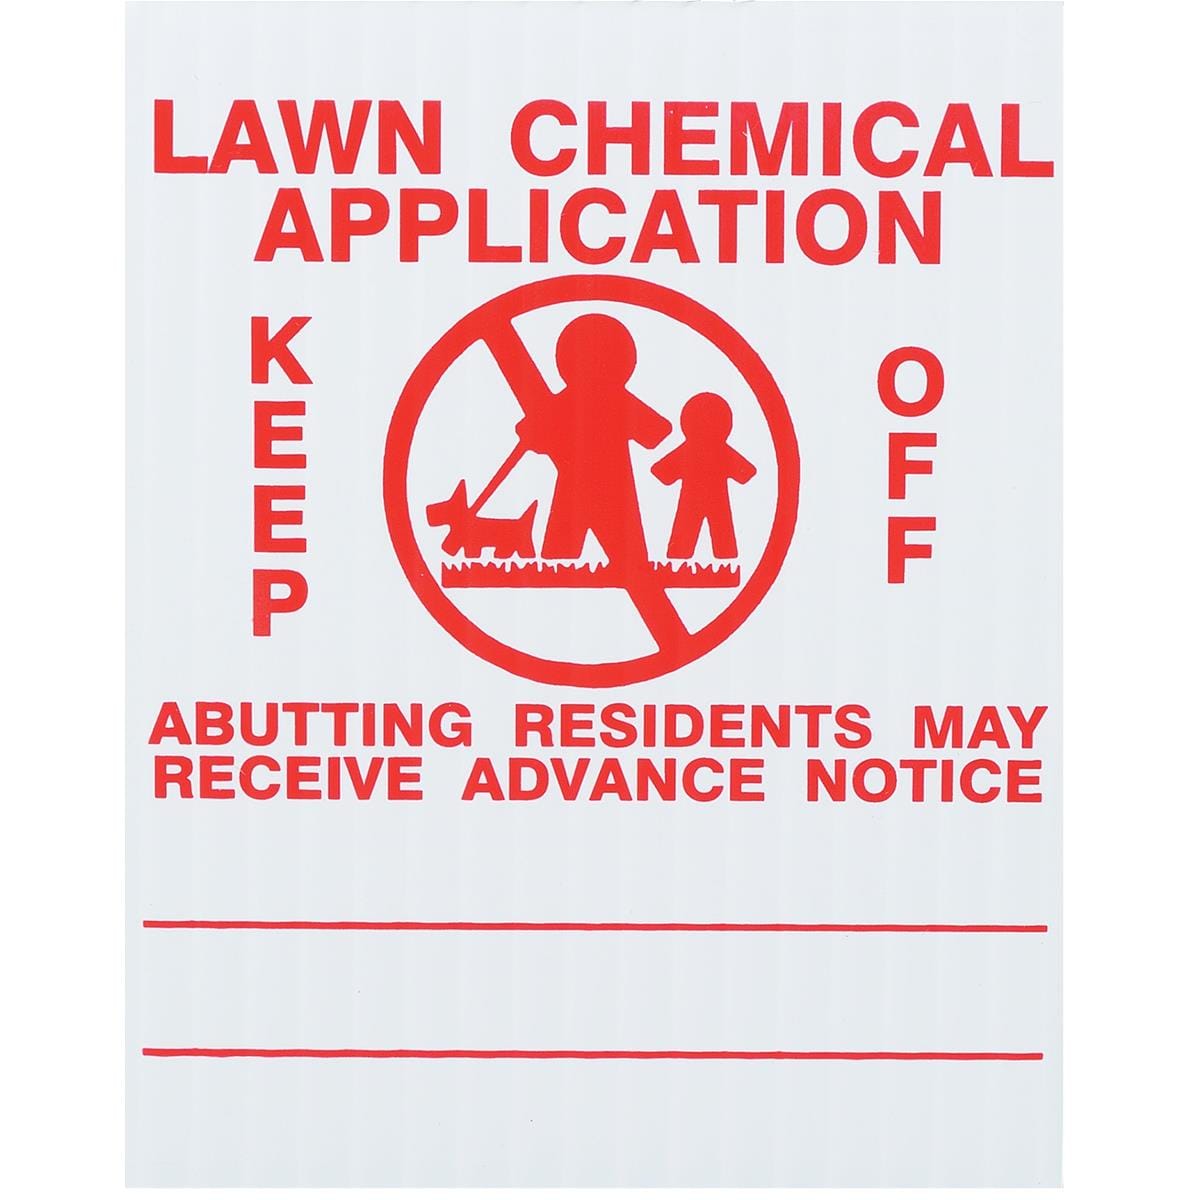 GEMPLER'S Ohio Lawn Pesticide Application Signs